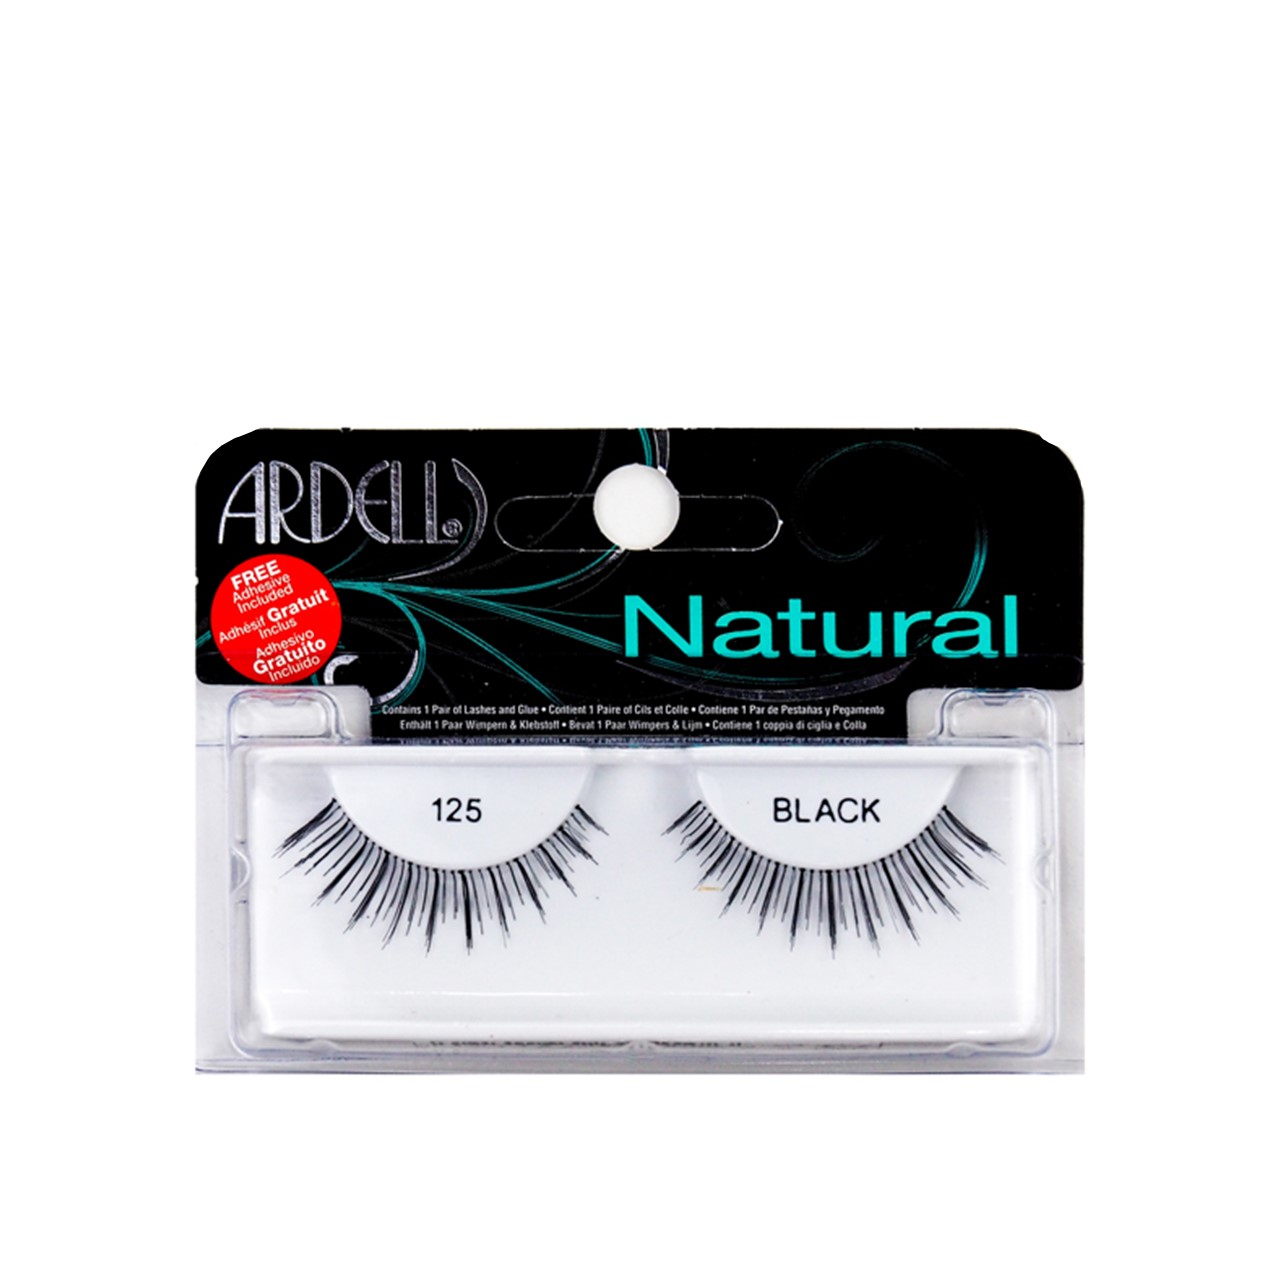 Ardell Natural Lashes 125 Black x1 Pair